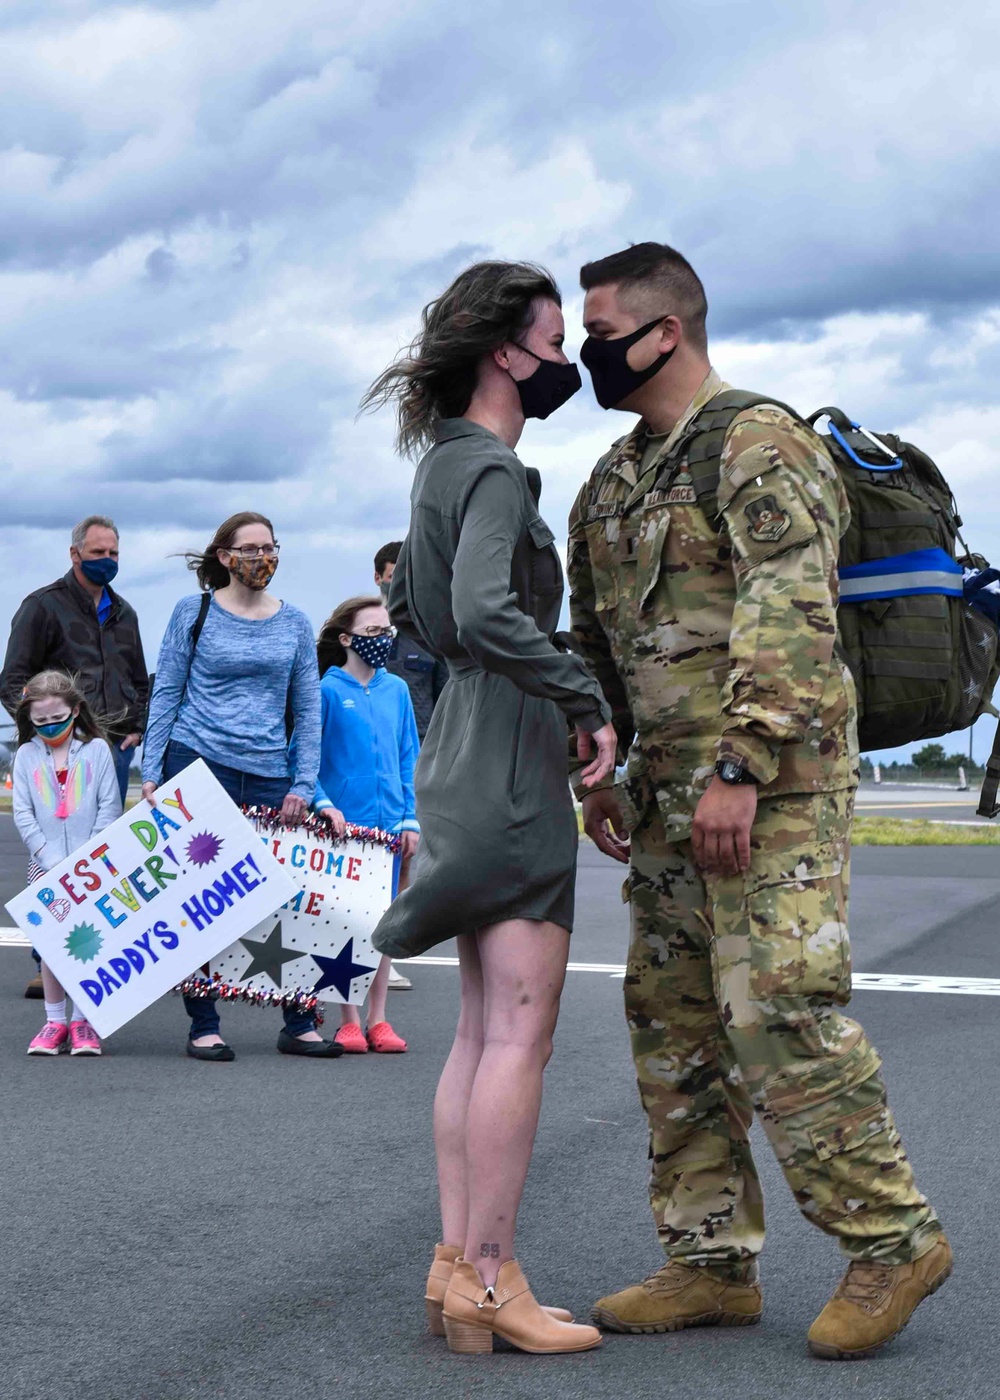 93rd ARS returns home after 7-month deployment